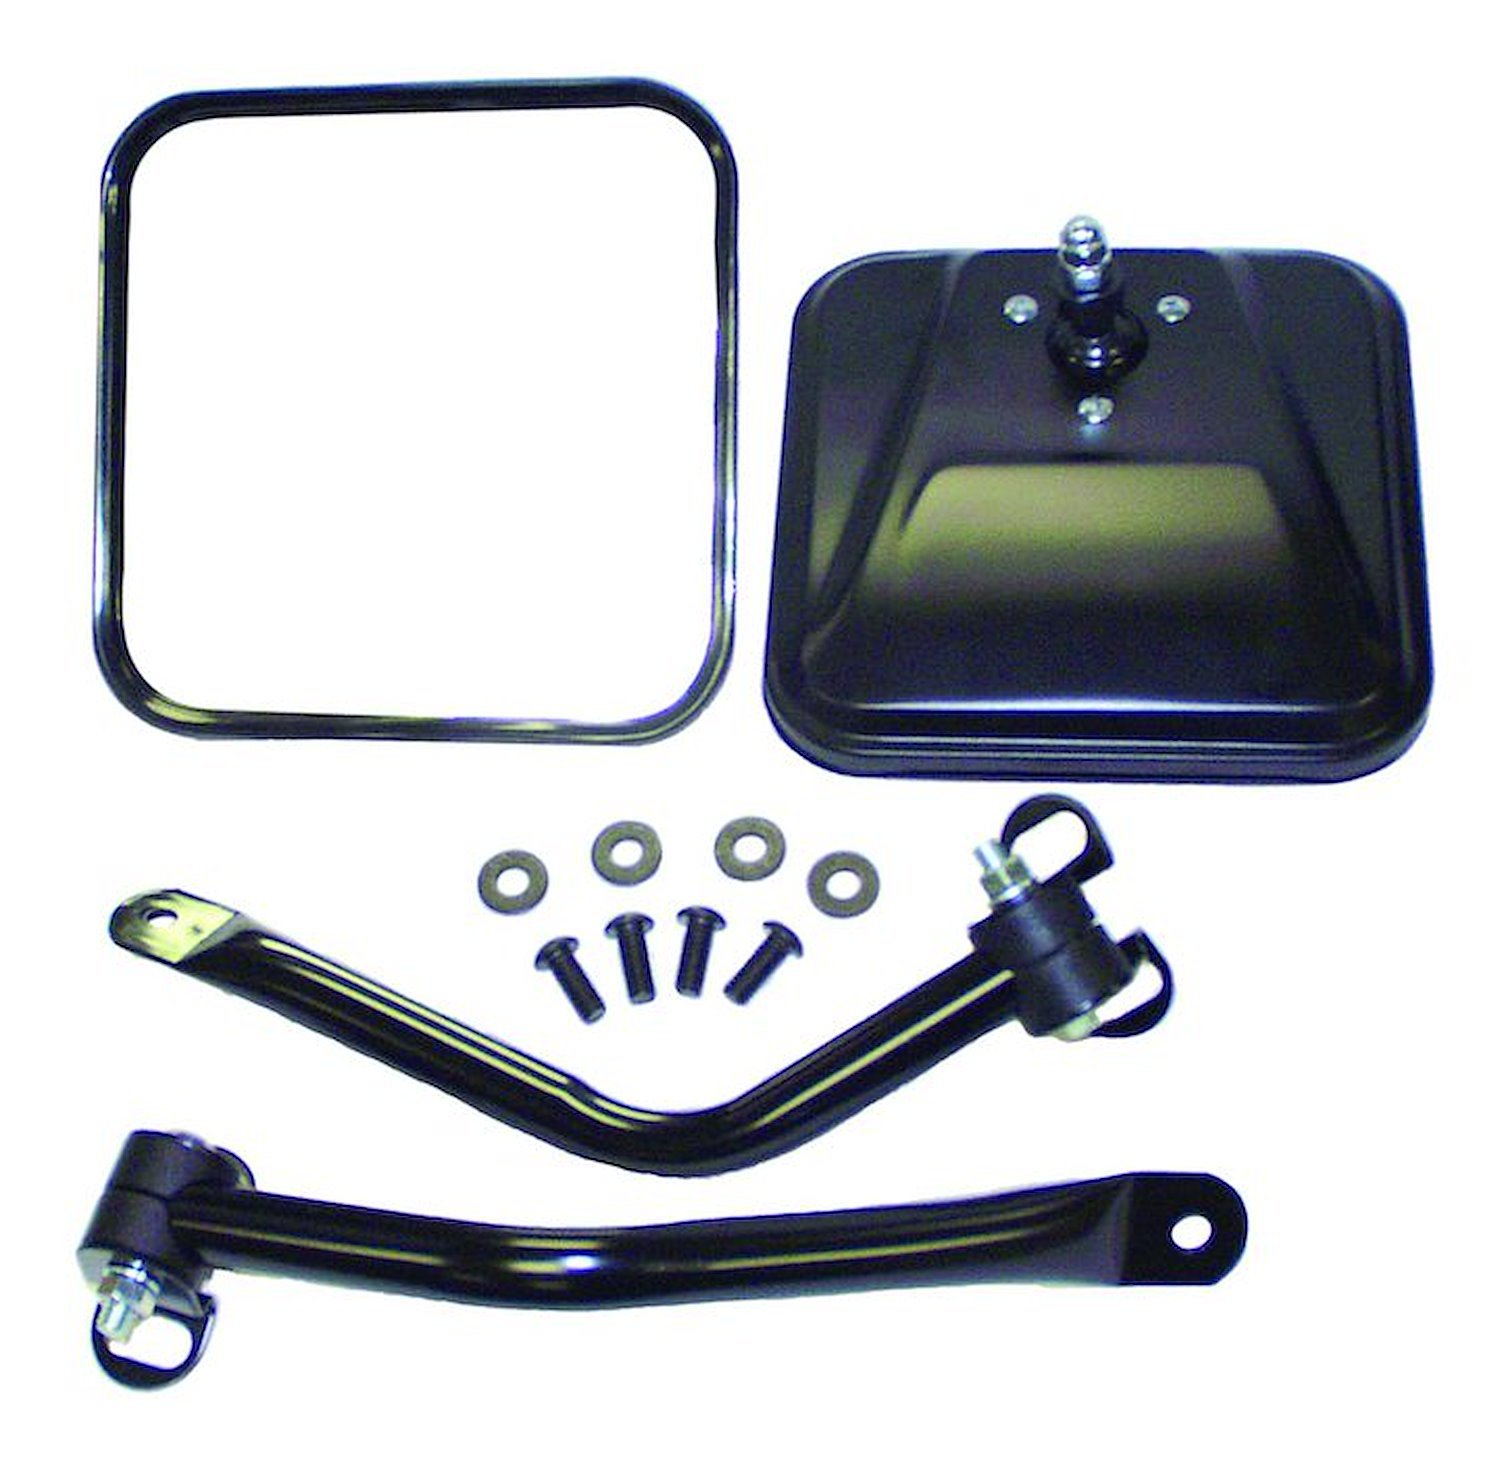 RT30012 Gloss Black Side Mirror Kit for 1997-2006 Jeep TJ Wrangler; Attaches to Side of Windshield Hinge